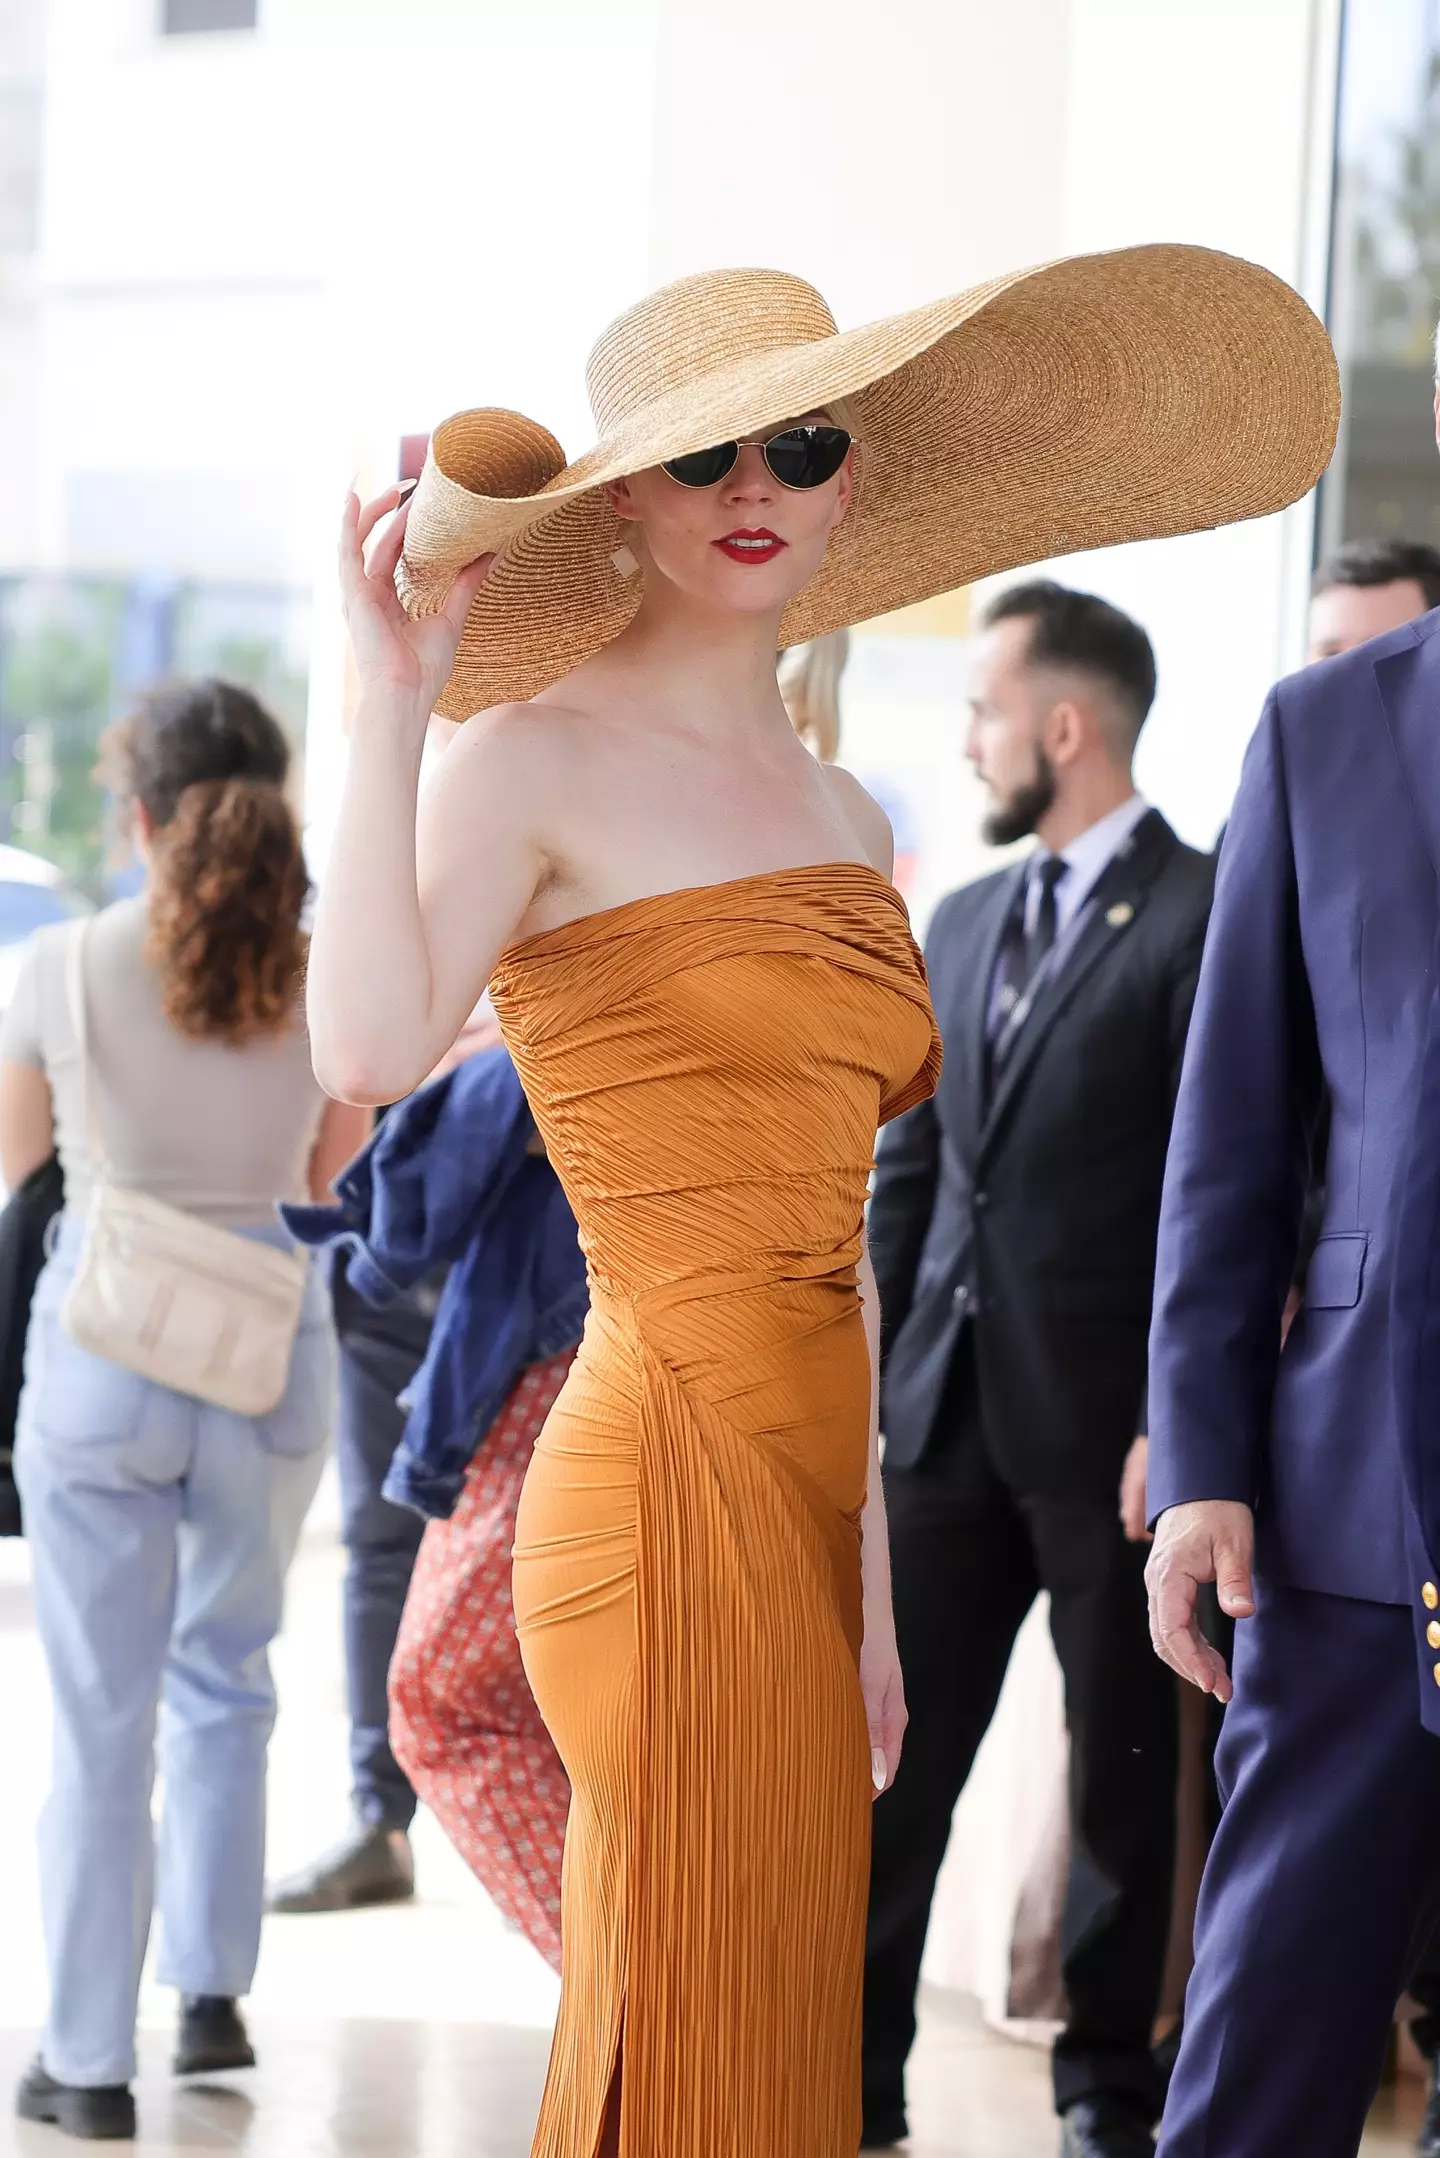 Anya Taylor-Joy was arriving in France for Cannes Film Festival. (Jacopo Raule/GC Images) 